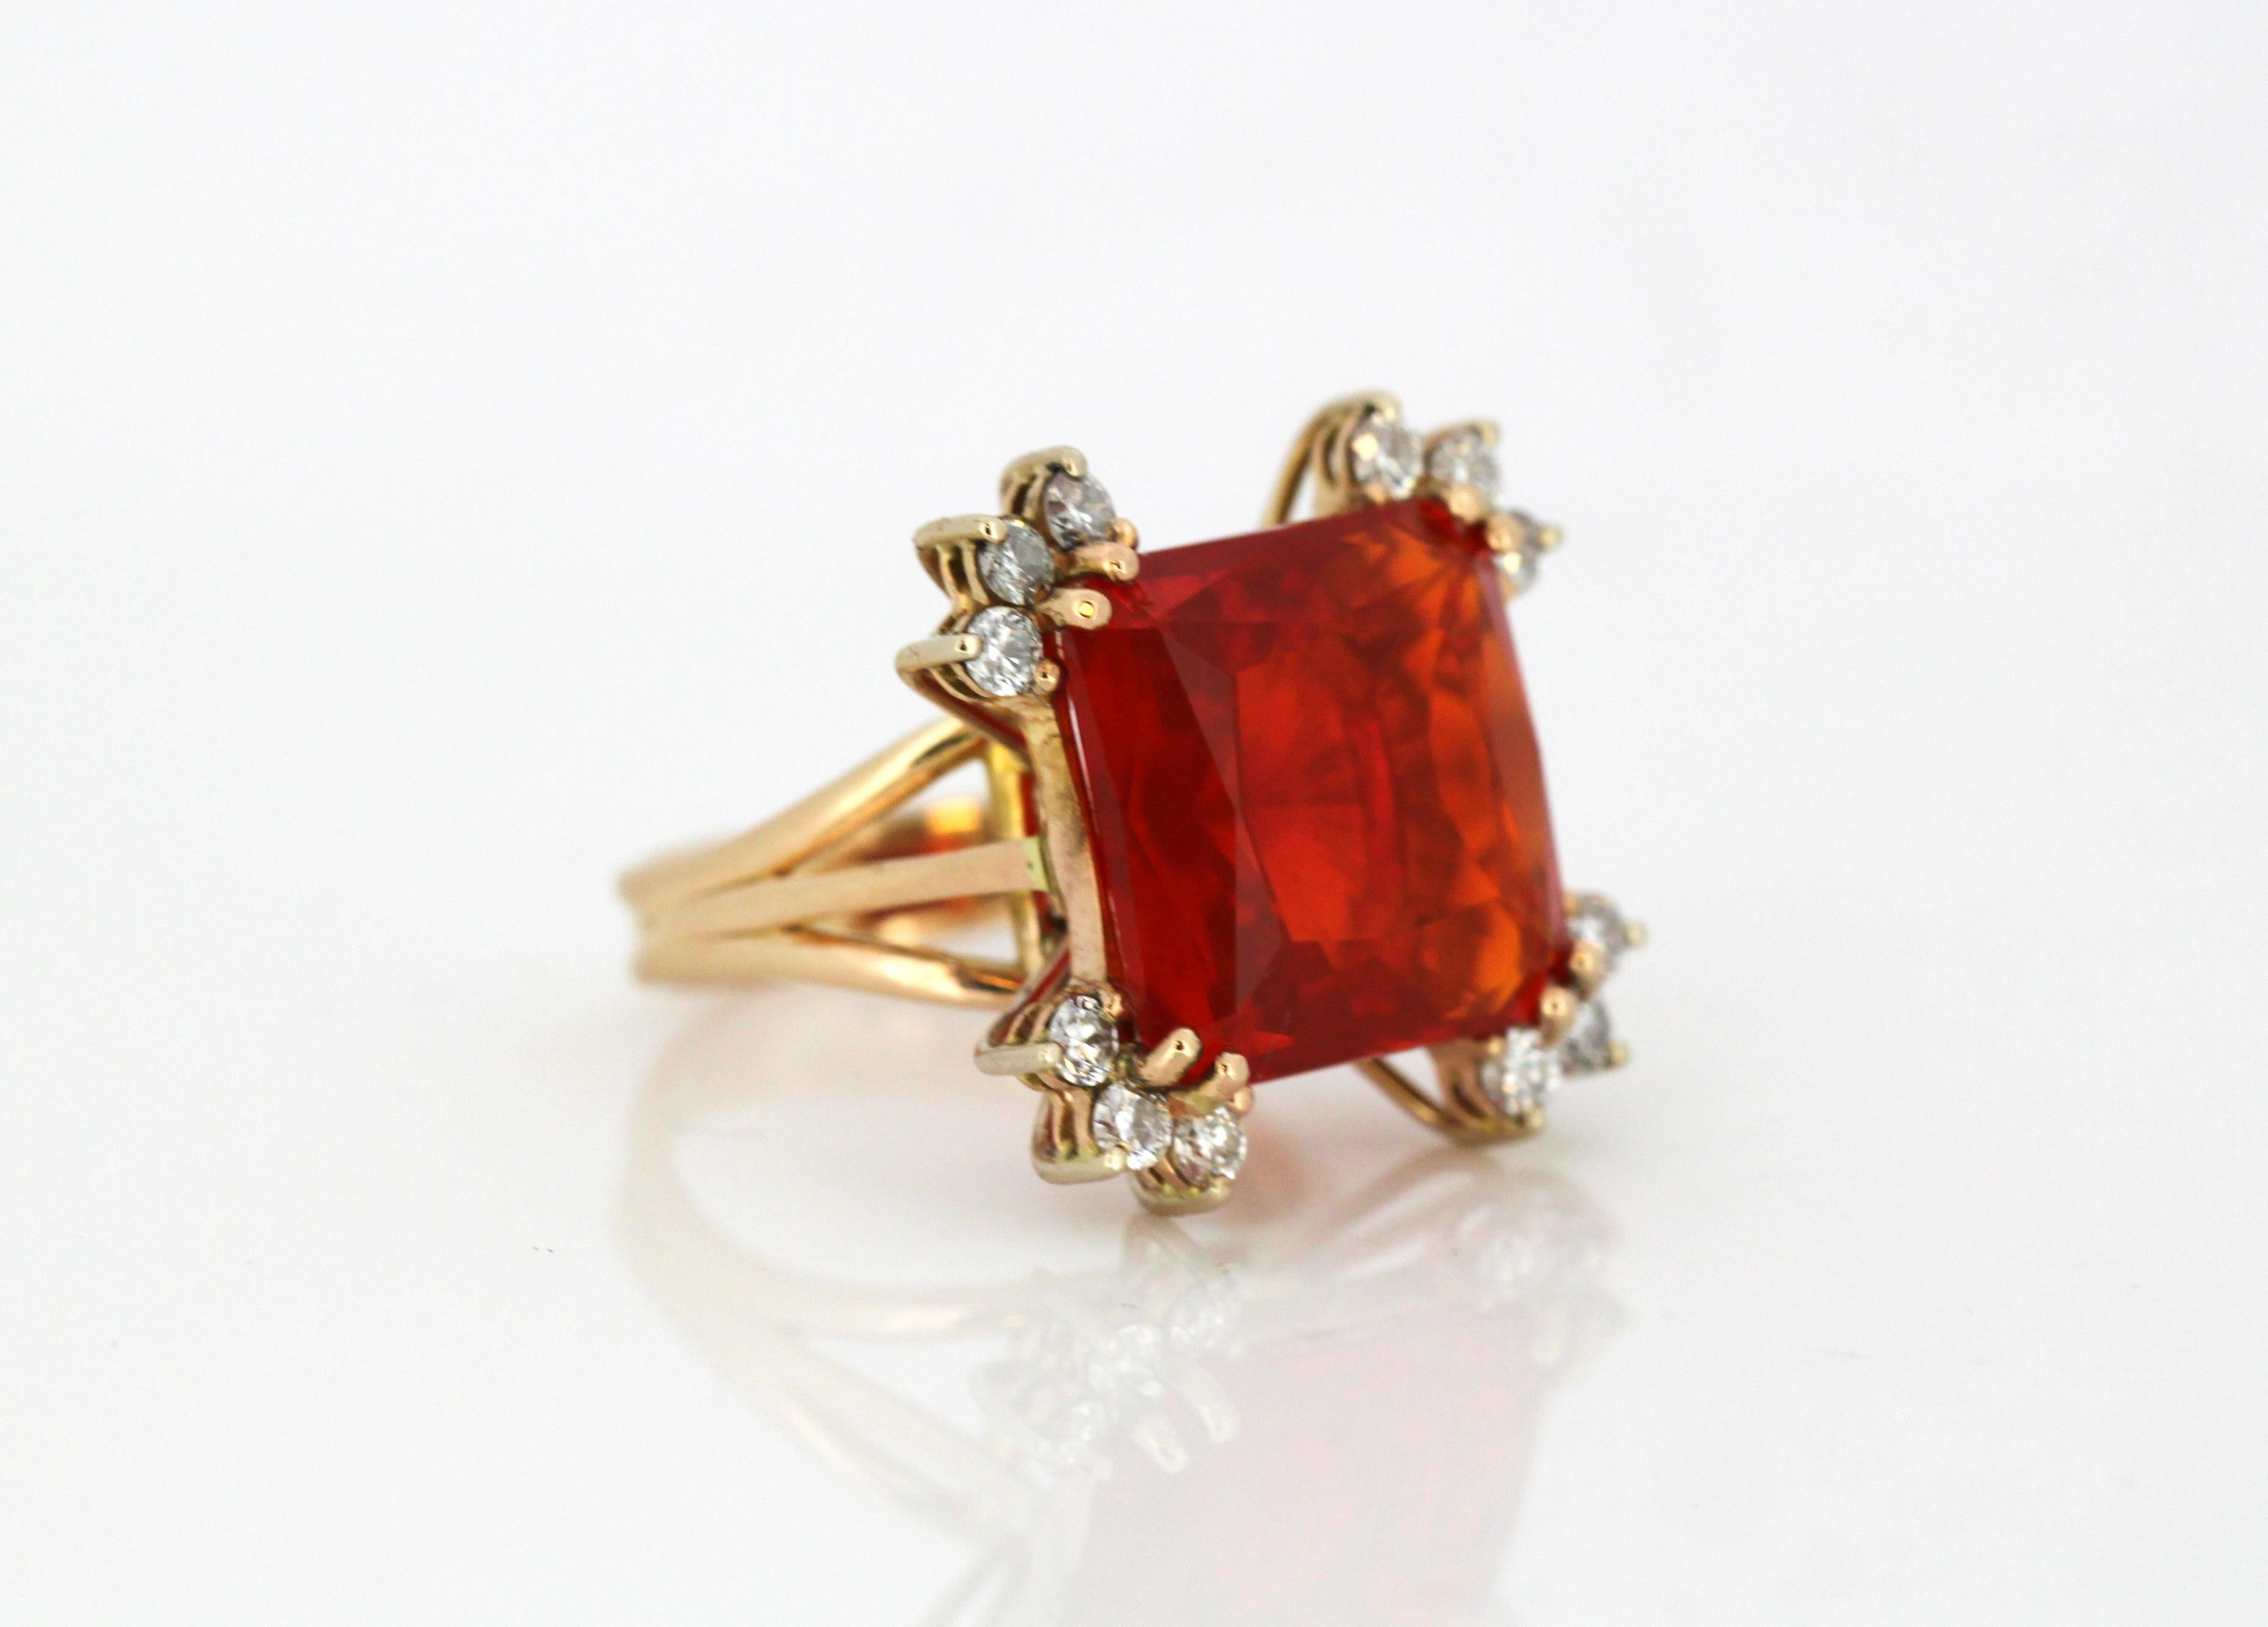 18 Karat Yellow Gold Ring with Natural Fire Opal 10.18 Carat and Diamonds, Italy 2